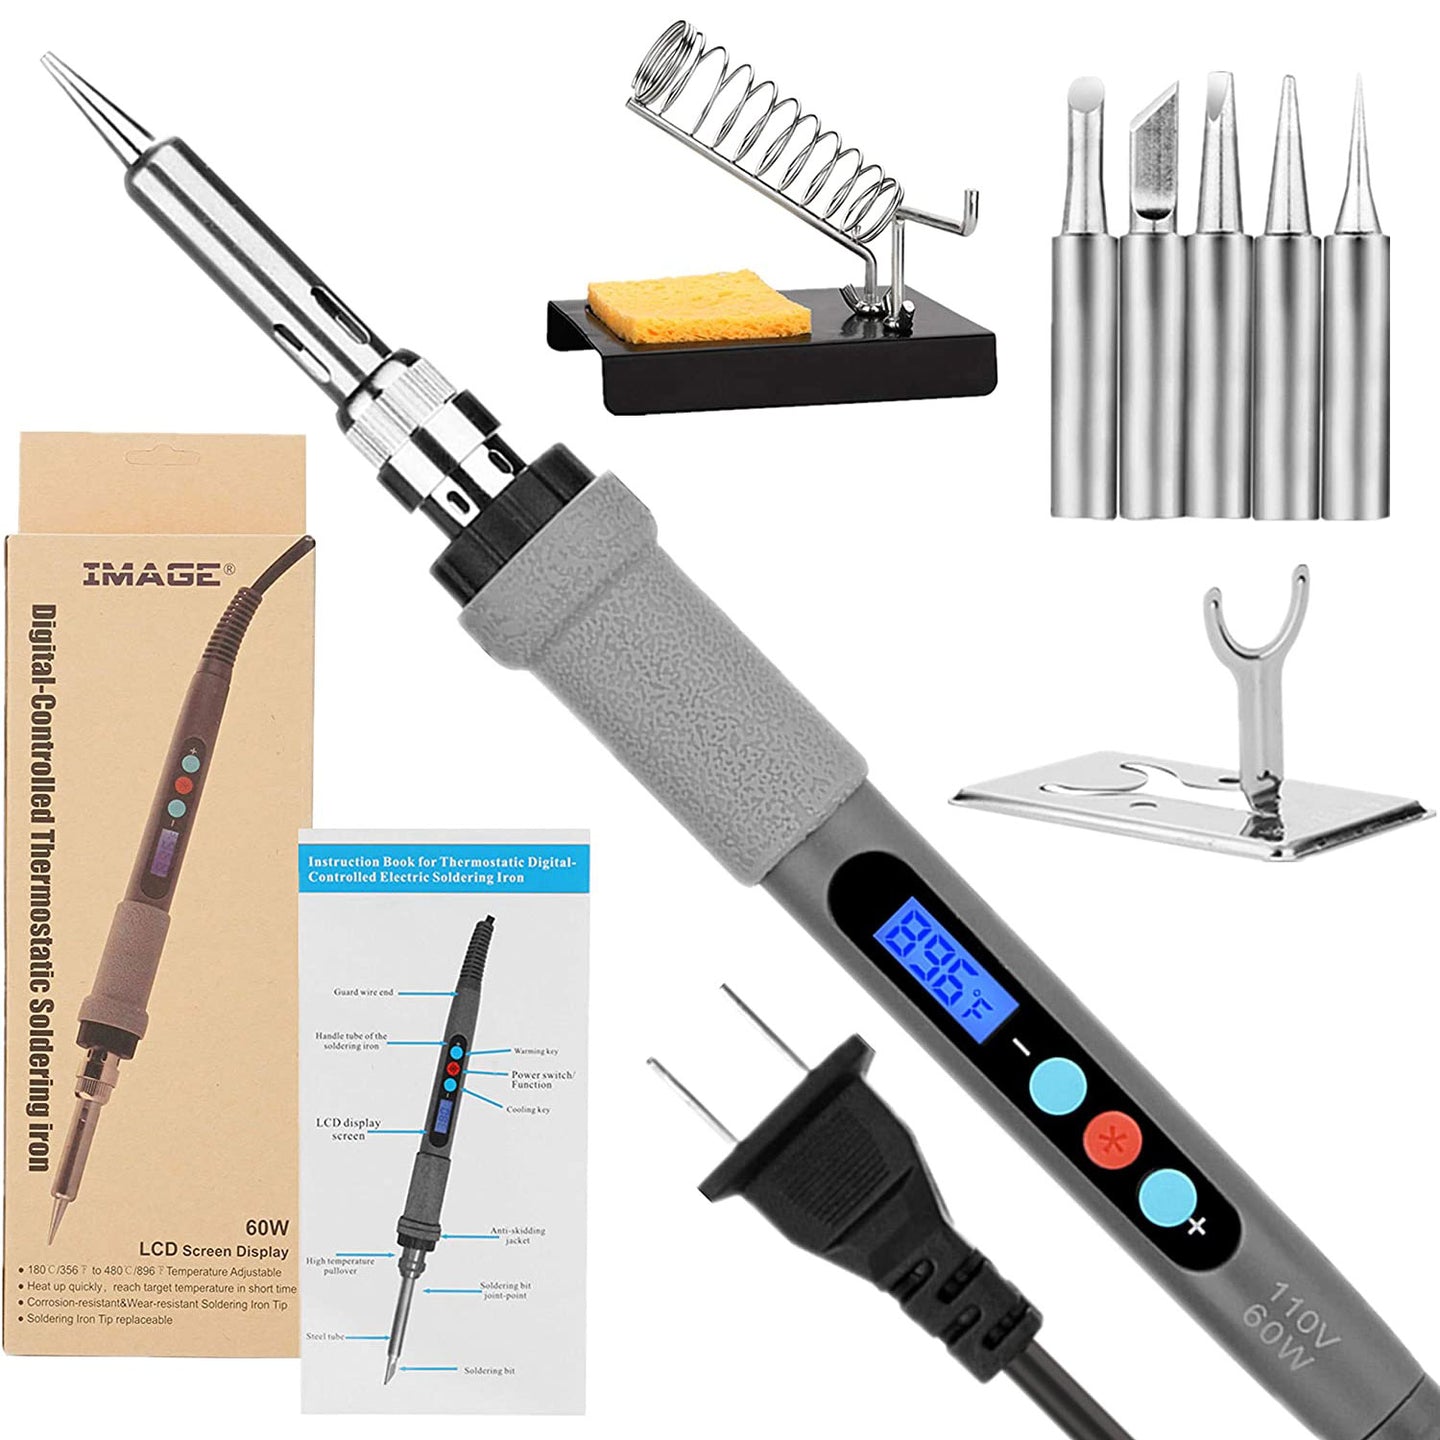 Welding Soldering Iron with Thermostatic Digital-Controlled and LCD Screen Display, 60 W Temperature Adjustable 180℃/356℉-480℃/896℉ with 5 PCS Soldering Bits, 2 Soldering Iron Stands & 1 Sponge